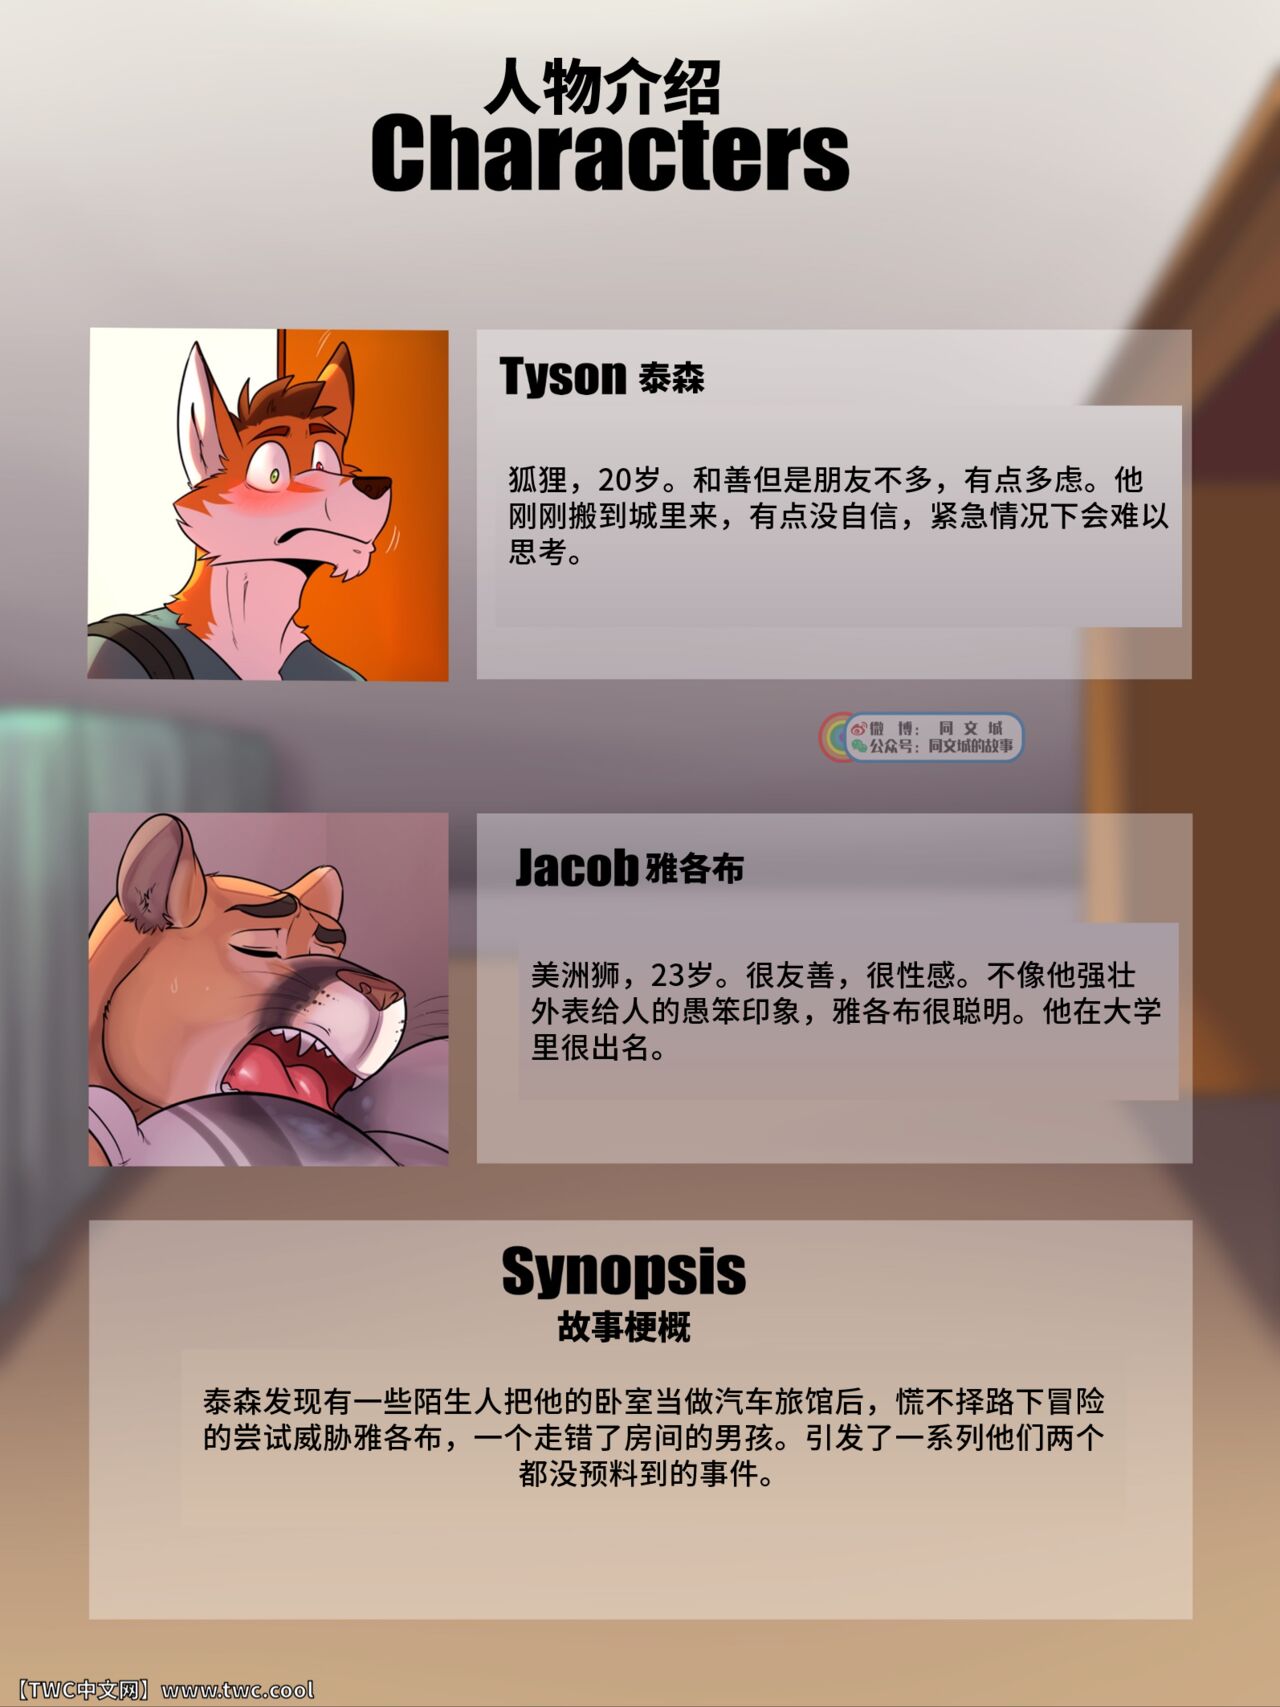 [Zourik]Just a Litle LIE (ONGOING) [Chinese] [同文城] [Digital] [Zourik]Just a Litle LIE (ONGOING) [Chinese] [同文城] [Digital]